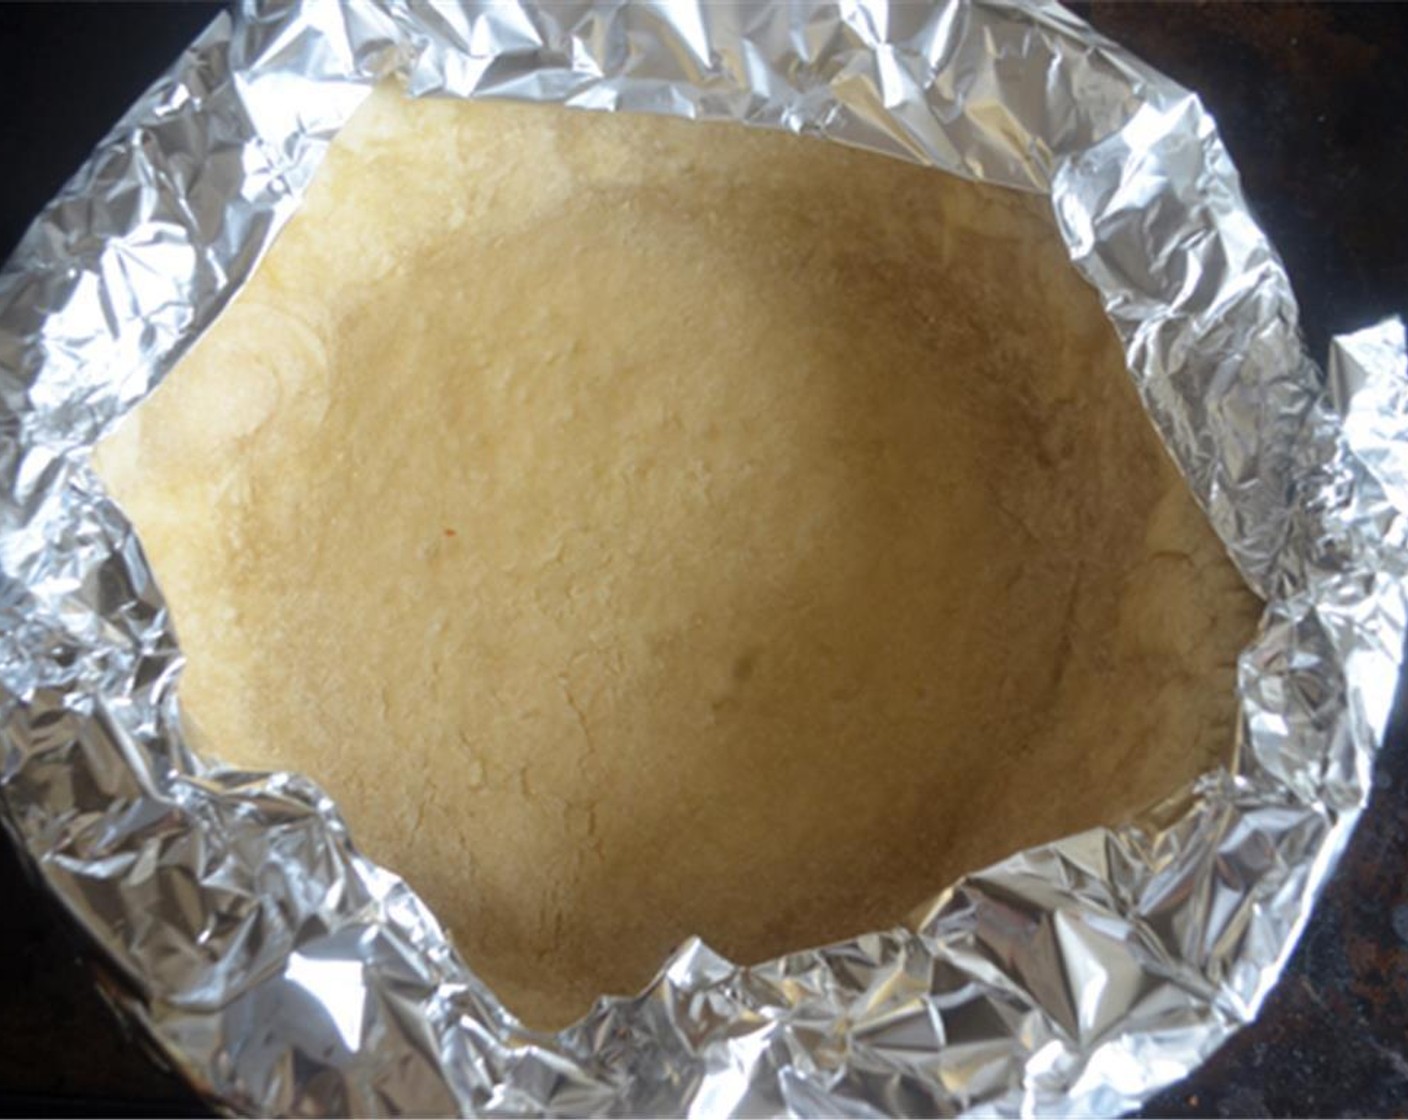 step 10 Take the crust out of the oven; remove the parchment paper and beans or pie weights and tent the edges from getting too dark. Bake for another 20 minutes or until dough is dry and golden. If the bottom puffs up, gently press it down with a flat spatula.